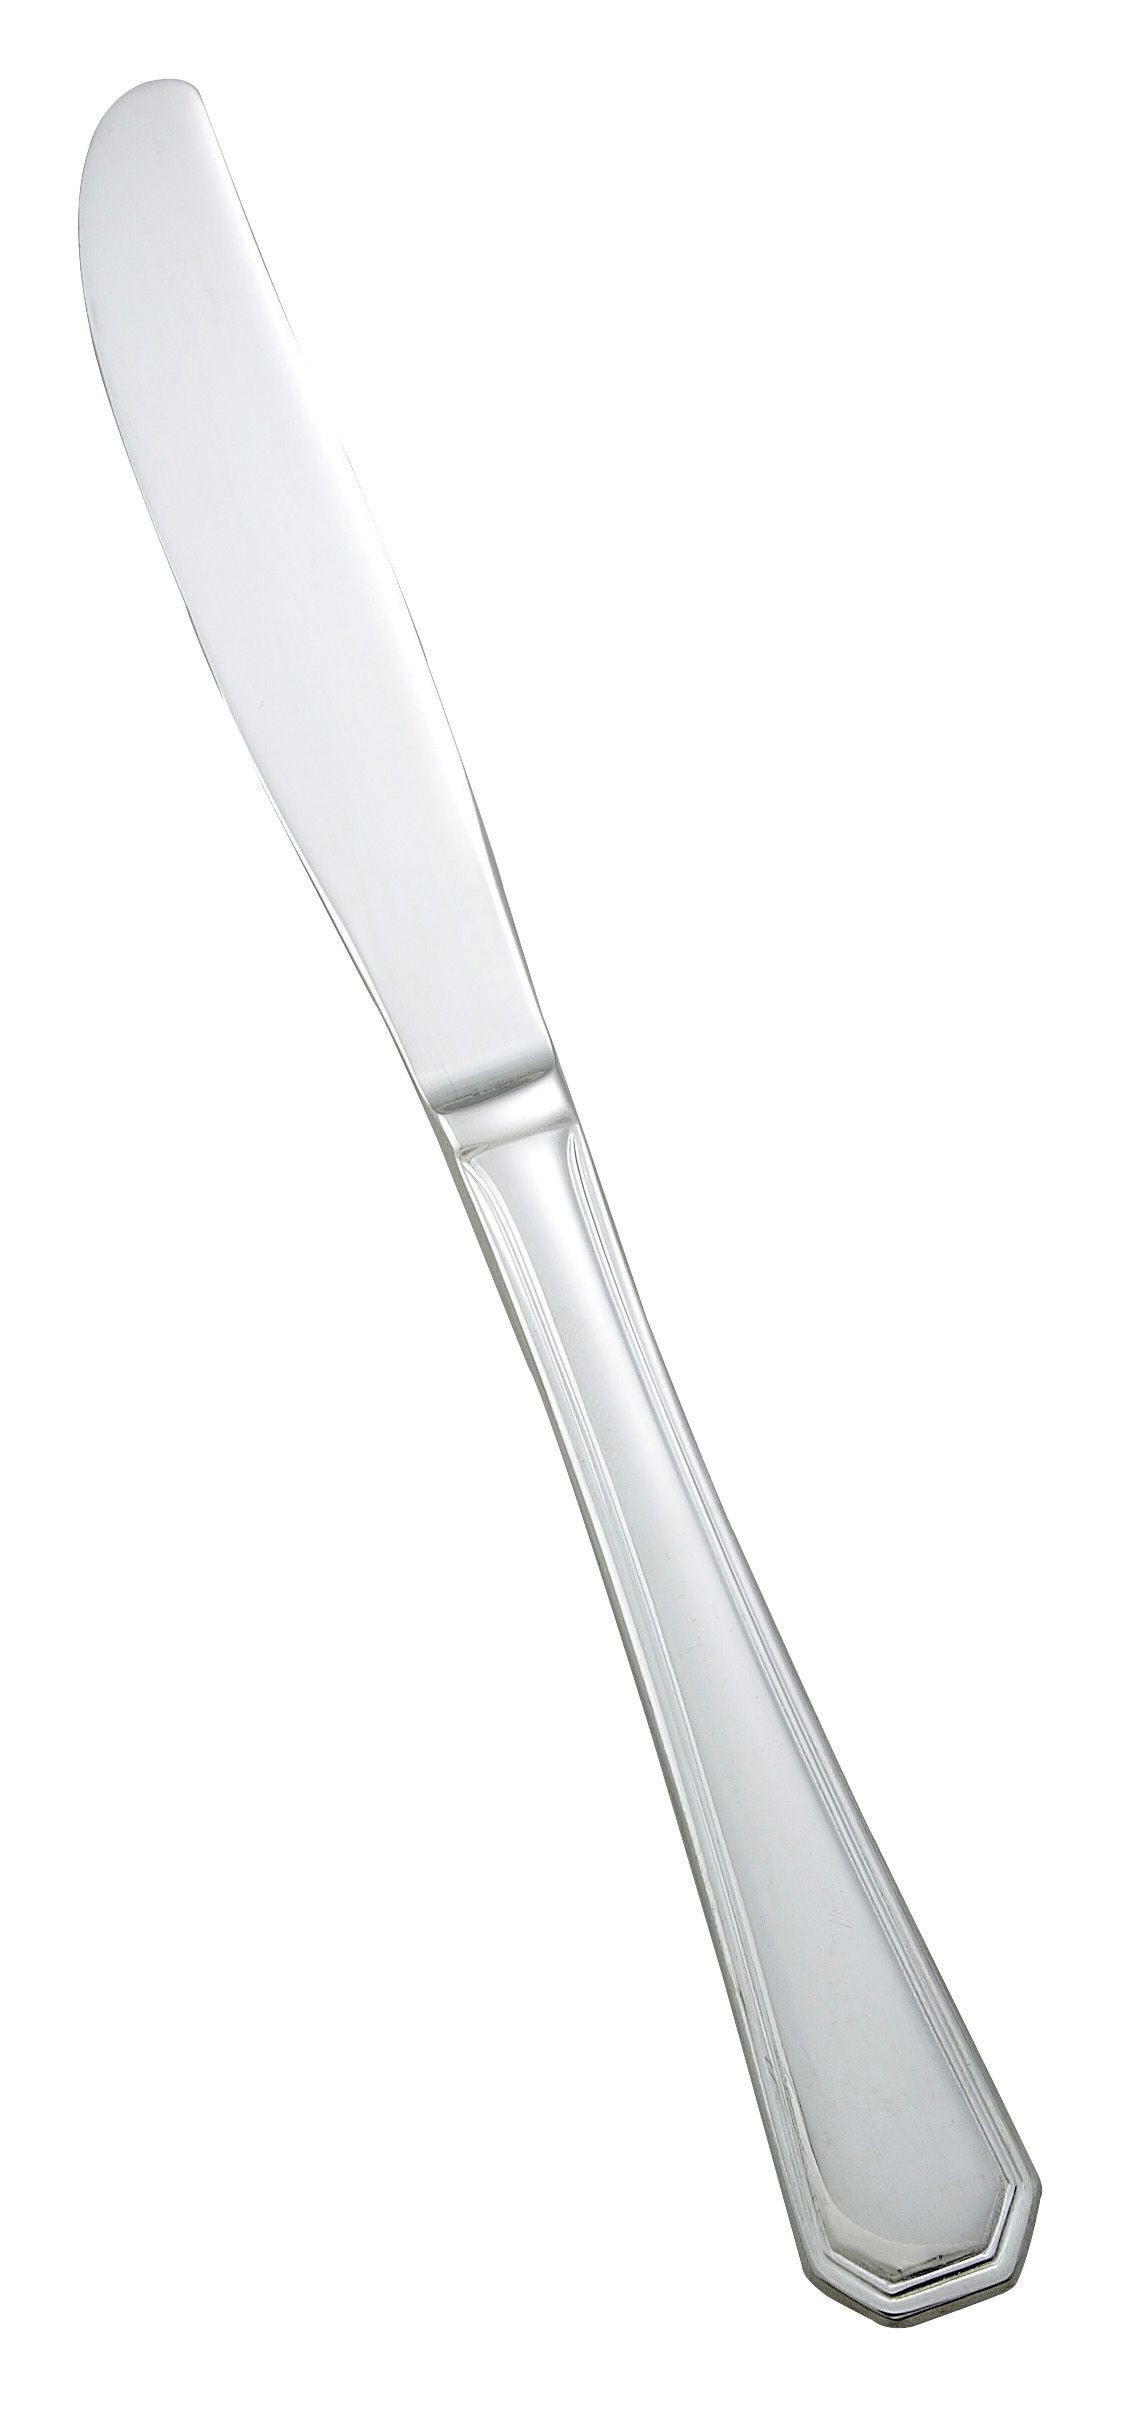 Winco 0035-08 Victoria Extra Heavy Stainless Steel Dinner Knife (12/Pack)